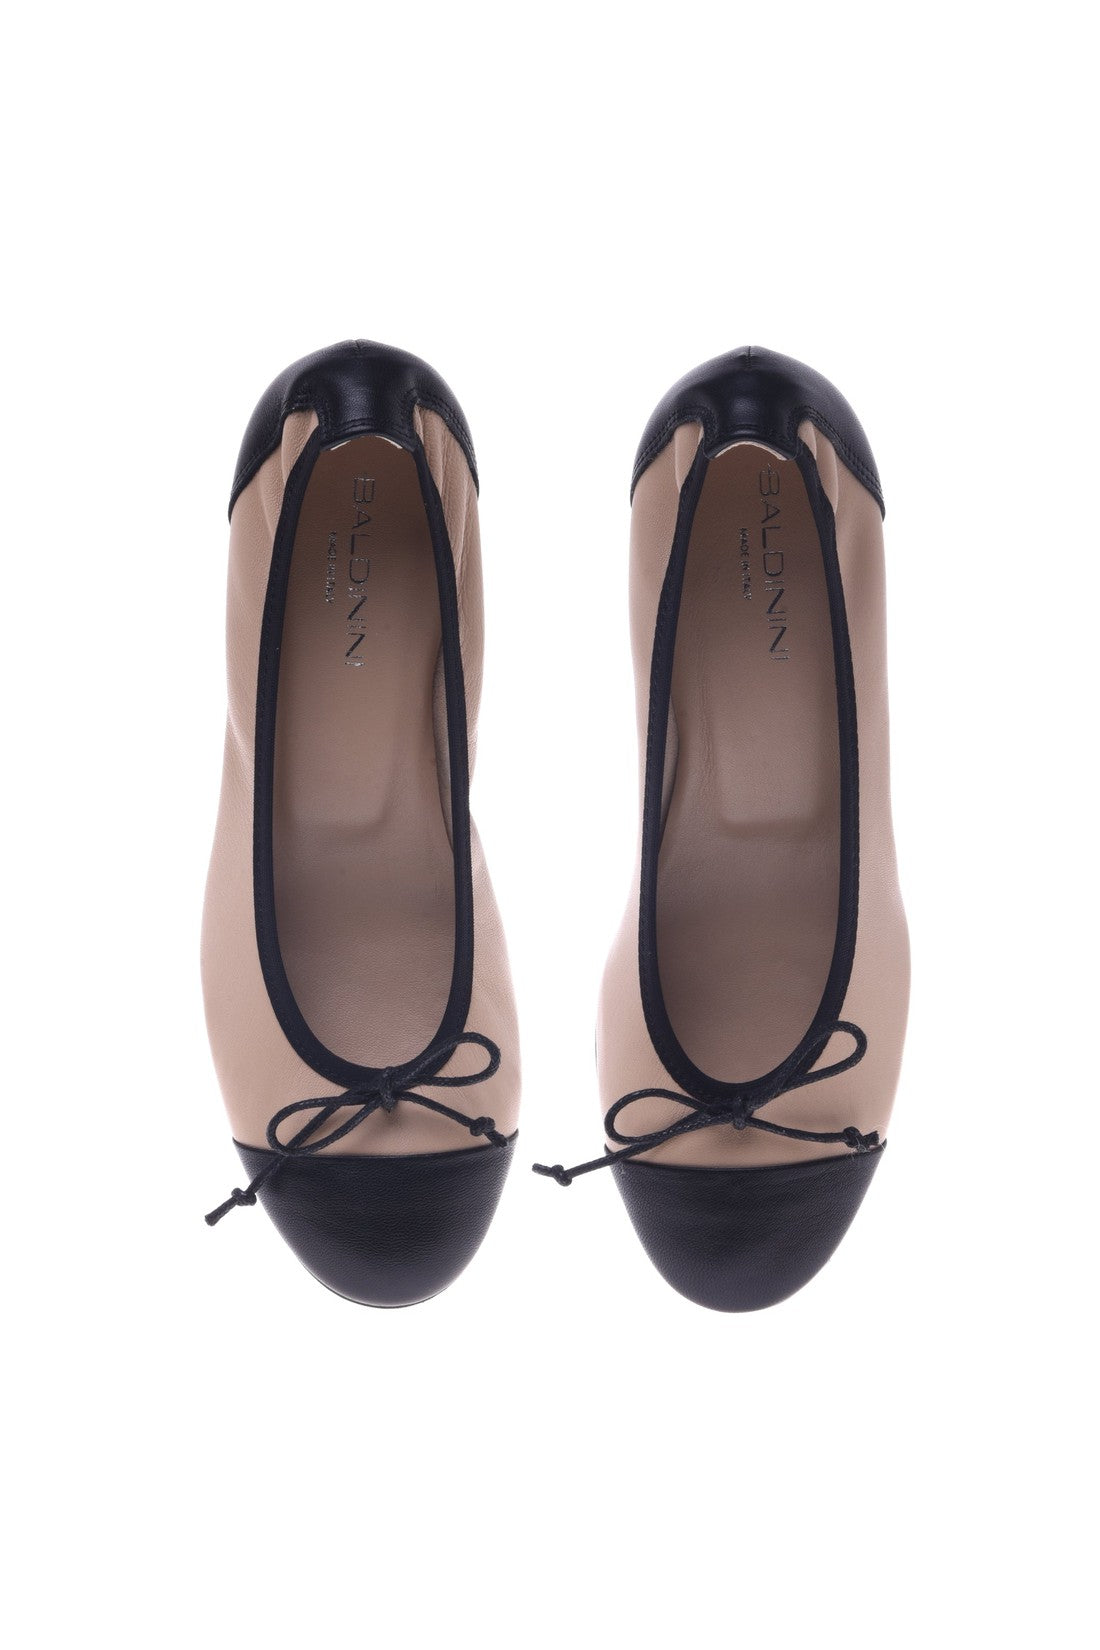 BALDININI-OUTLET-SALE-Ballerina-pump-in-black-and-powder-nappa-leather-Halbschuhe-ARCHIVE-COLLECTION-2.jpg